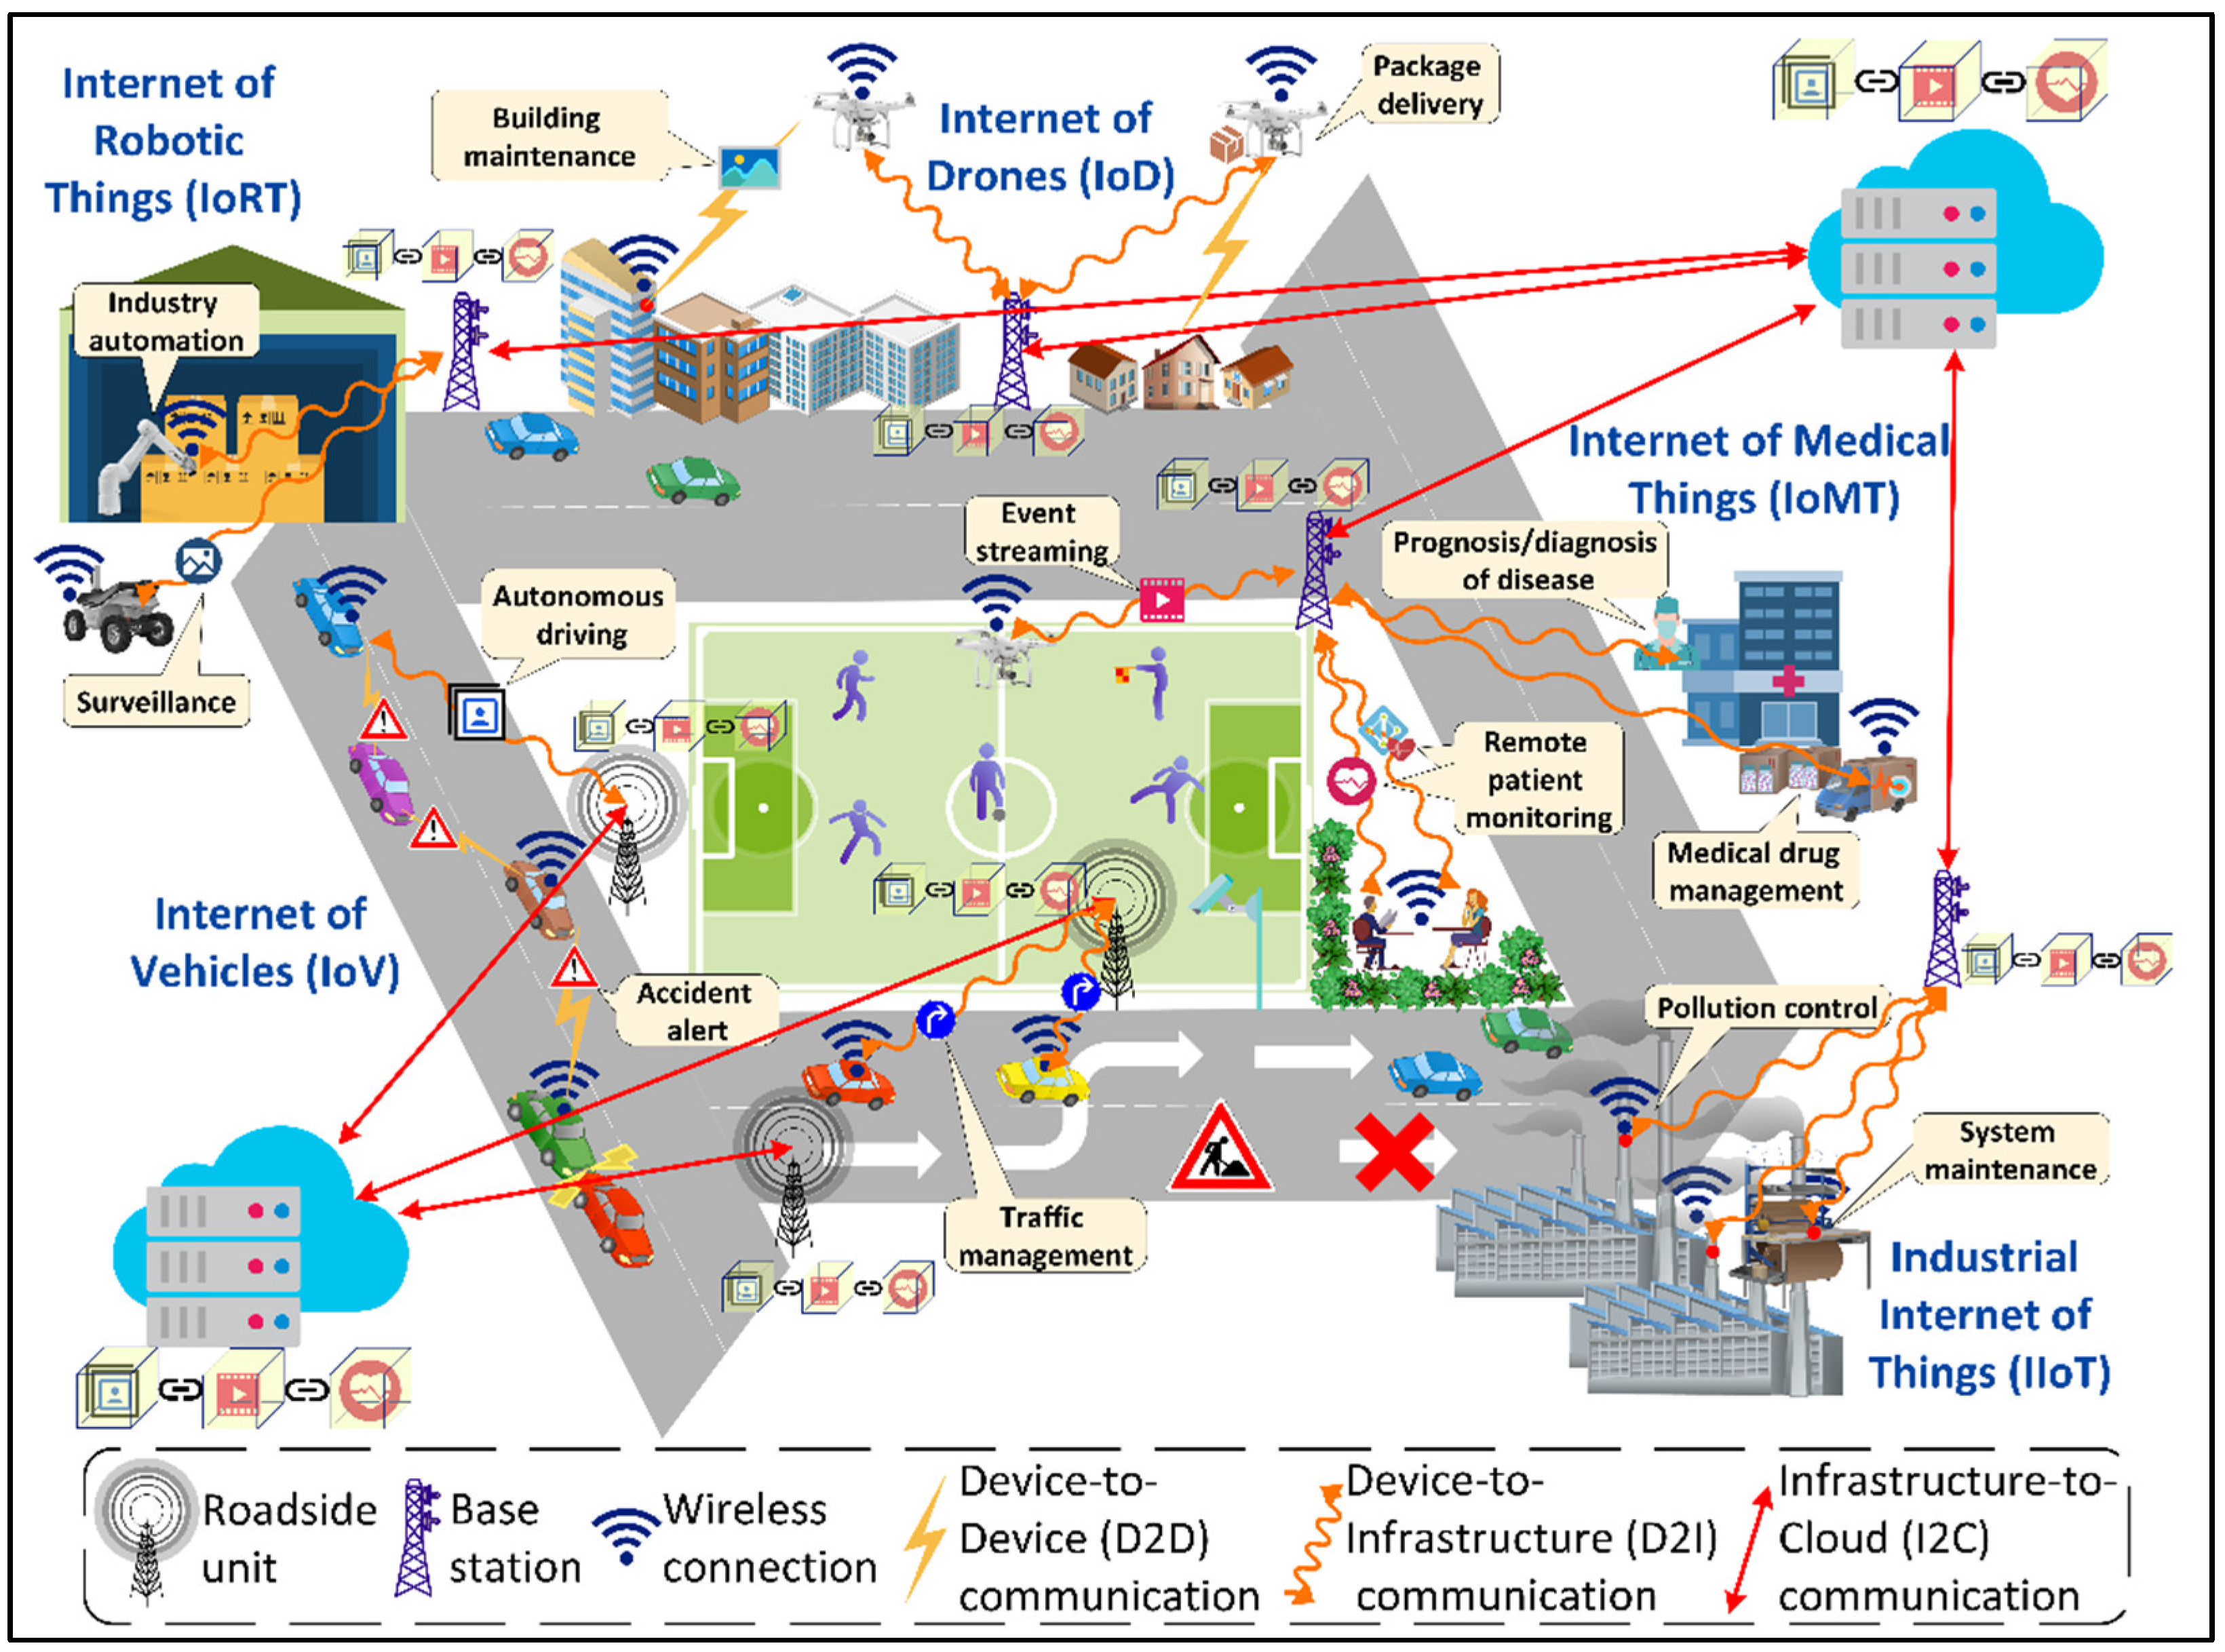 Sensors | Free Full-Text | Directions Ecosystems: for Applications and Challenges, Future Taxonomy, Smart and 6G Digital Networks Artificial Cities Self-Learning Intelligence